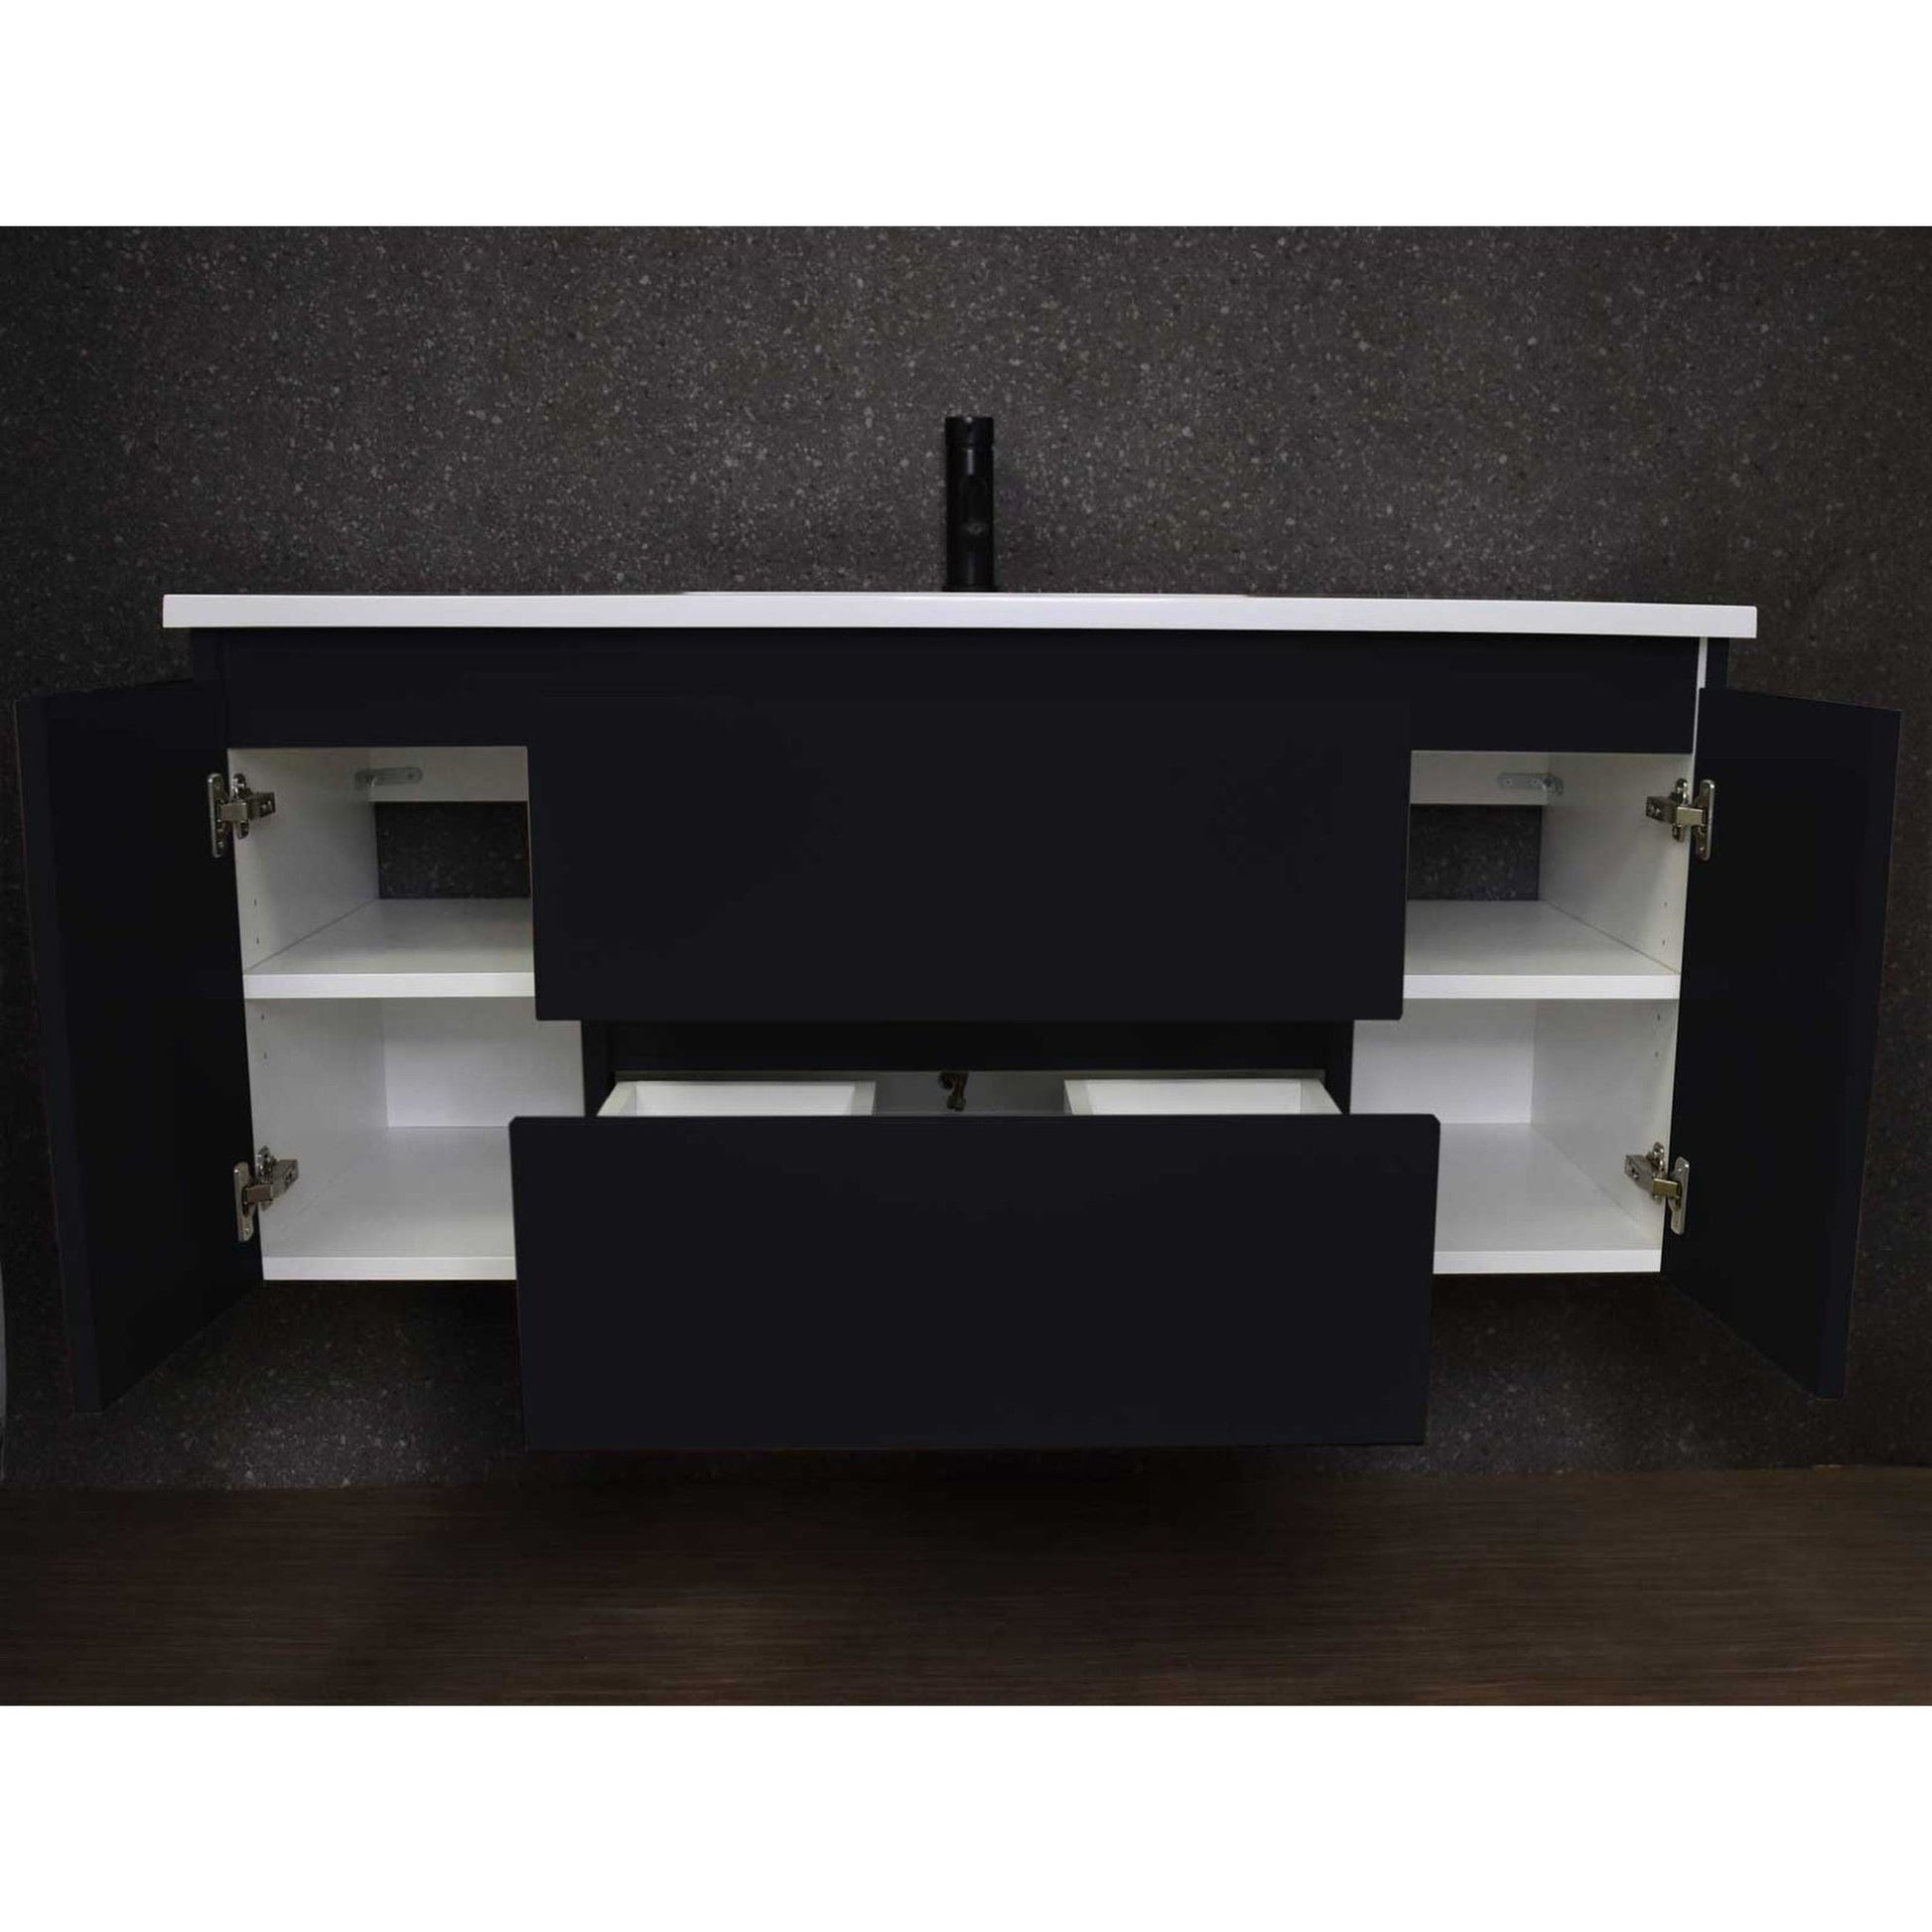 Volpa USA Salt 48" x 20" Glossy Black Wall-Mounted Floating Bathroom Vanity With Drawers, Acrylic Top and Integrated Acrylic Sink